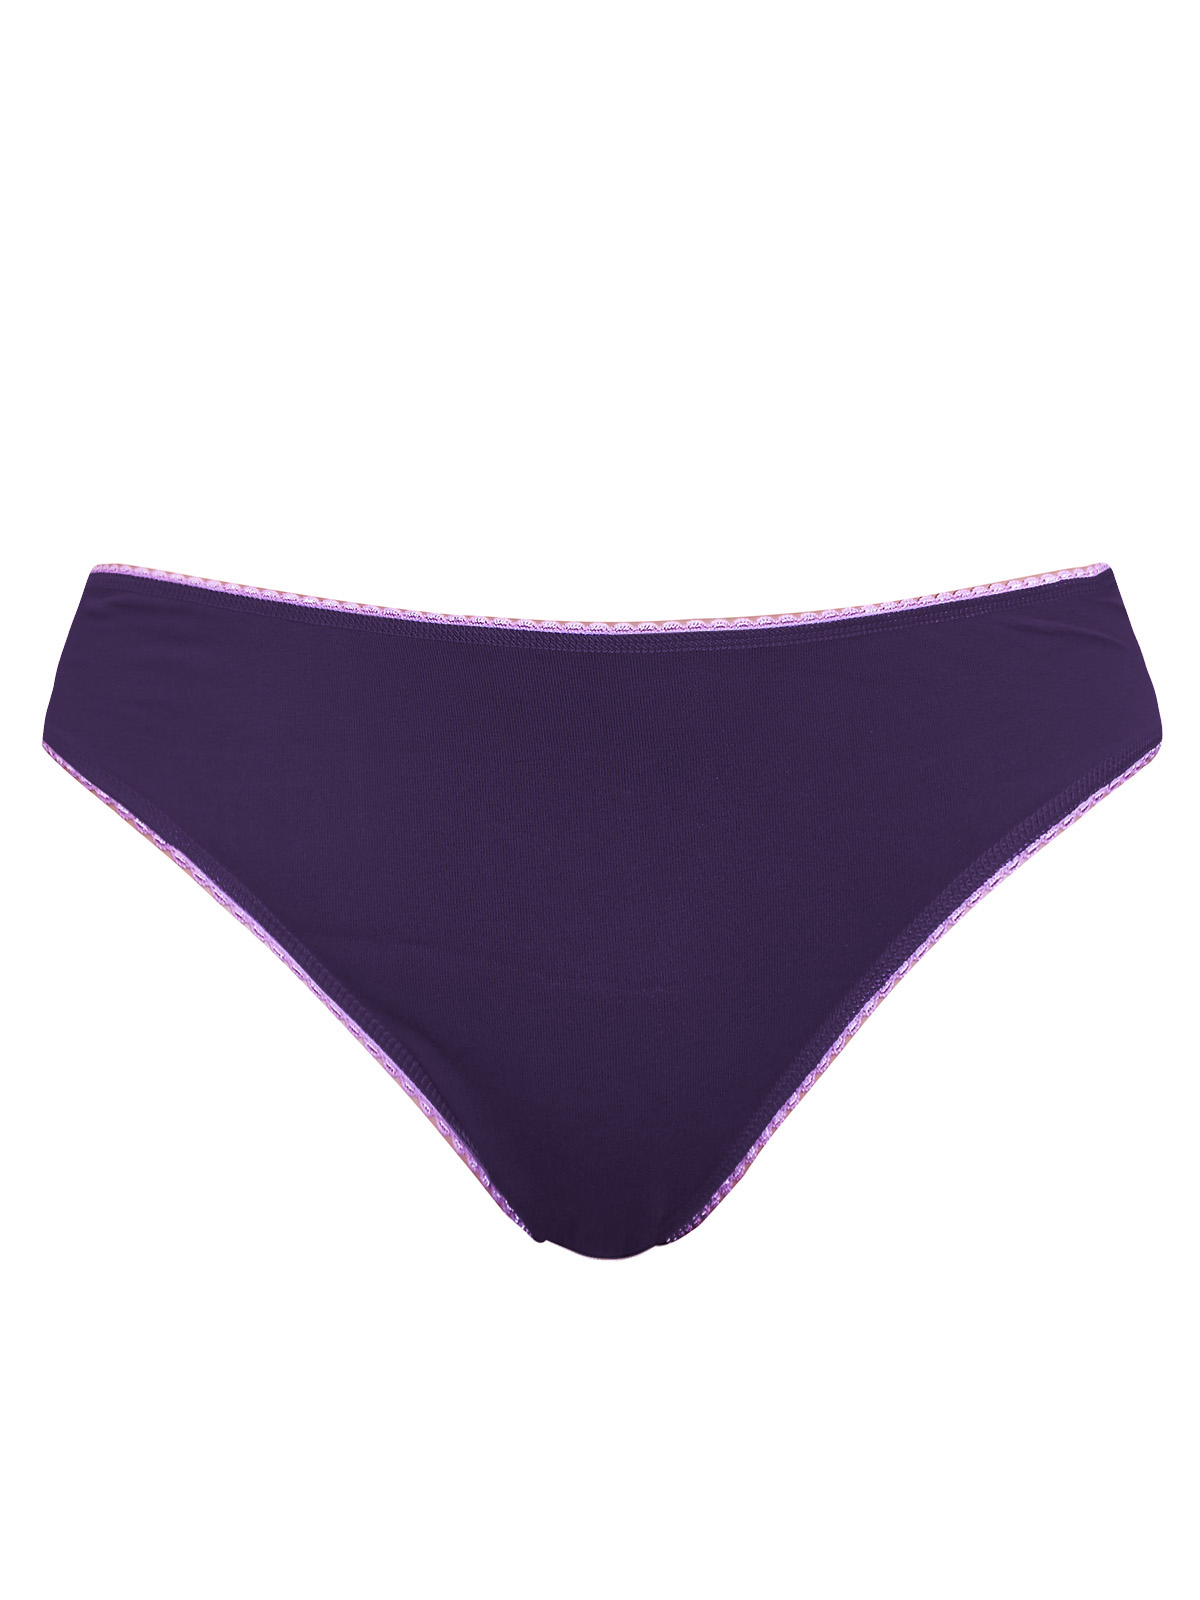 Marks and Spencer - - M&5 PLUM Scallop Lace Trim Brazilian Knickers ...